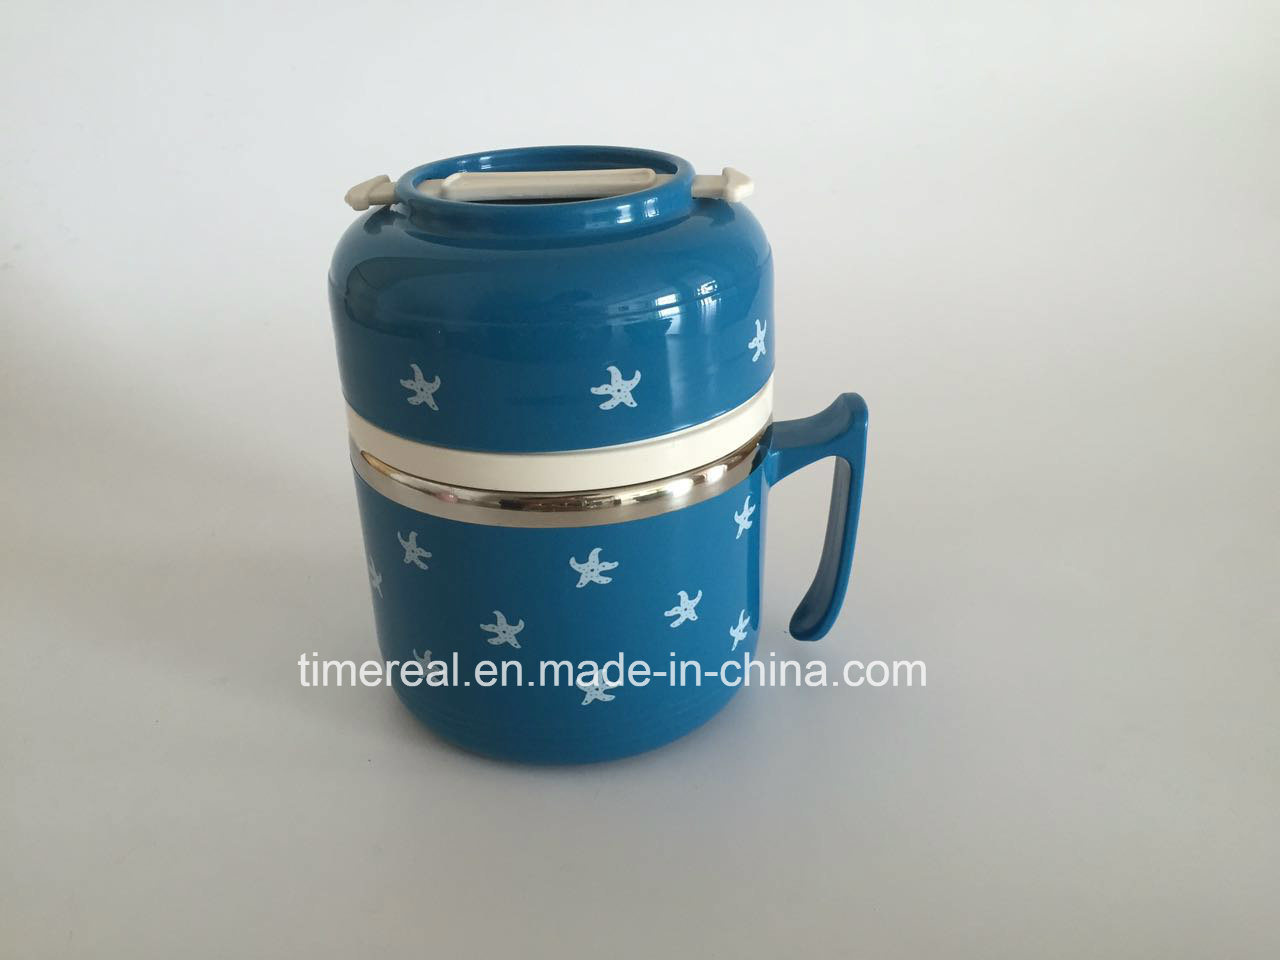 Stainless Steel Food Box Carrier with Hand Xg-001